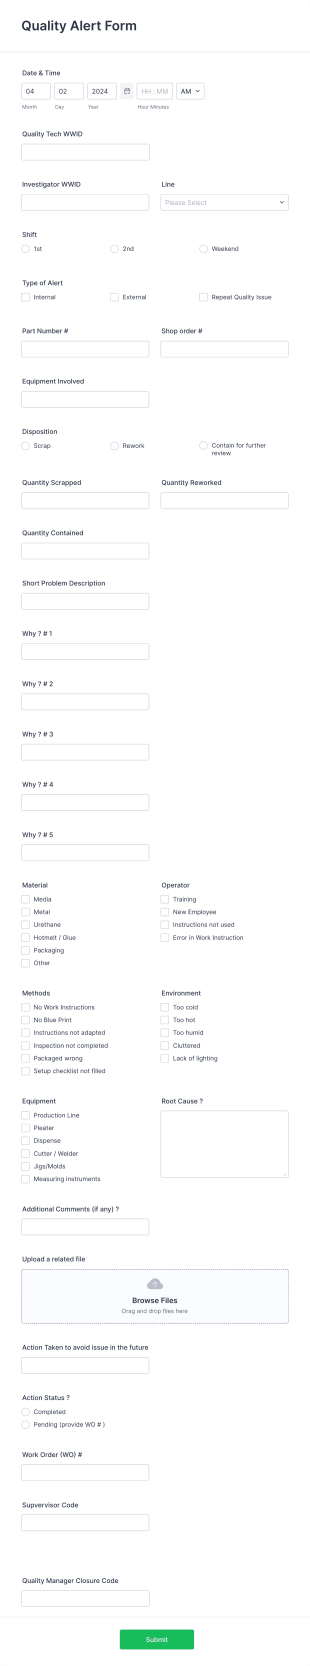 Quality Alert Form Template